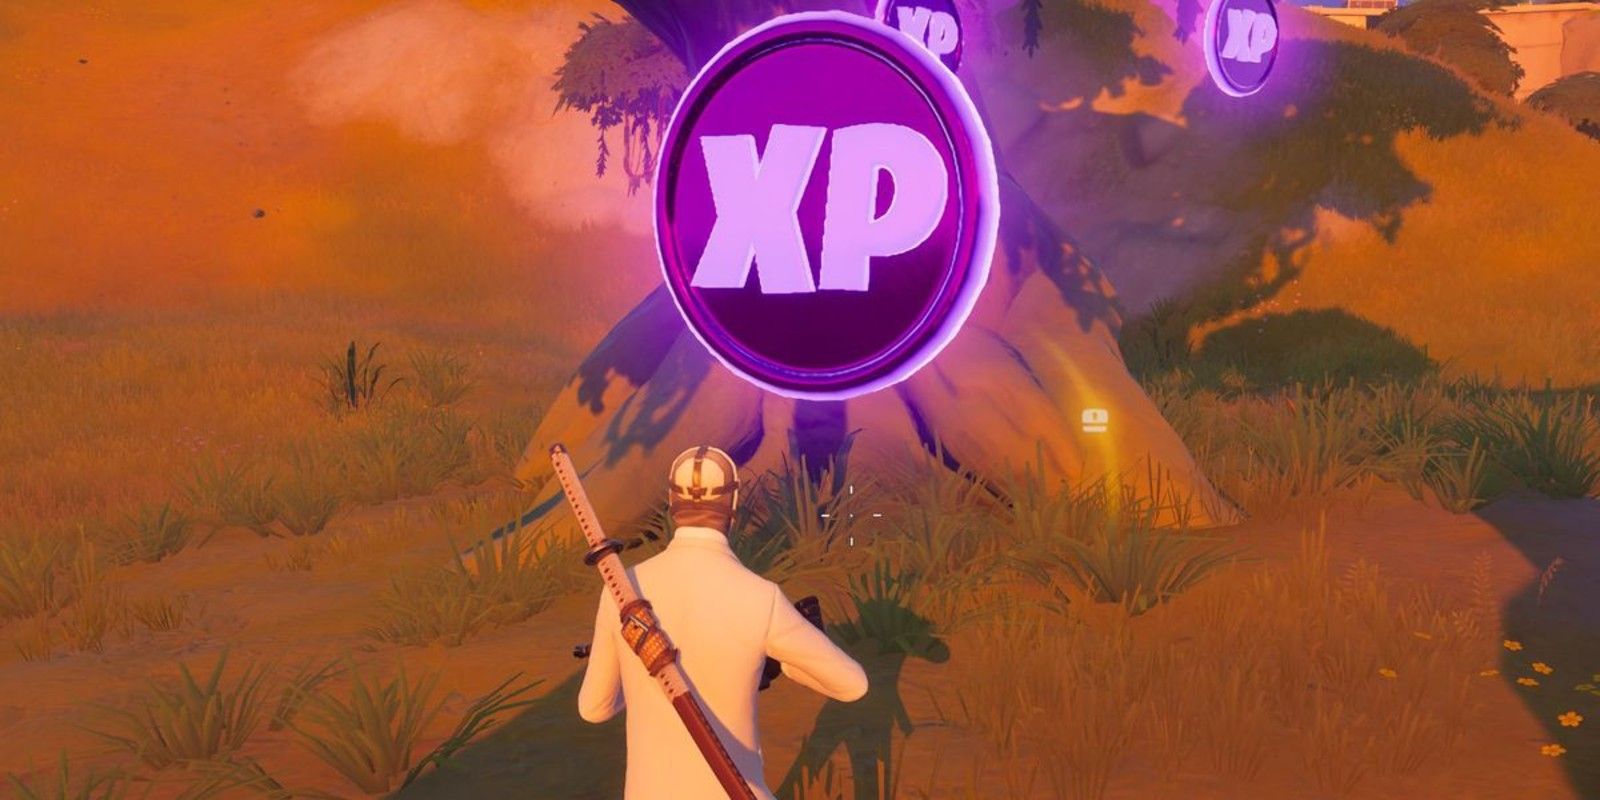 A player finds a Purple XP Coin near some trees in Fortnite